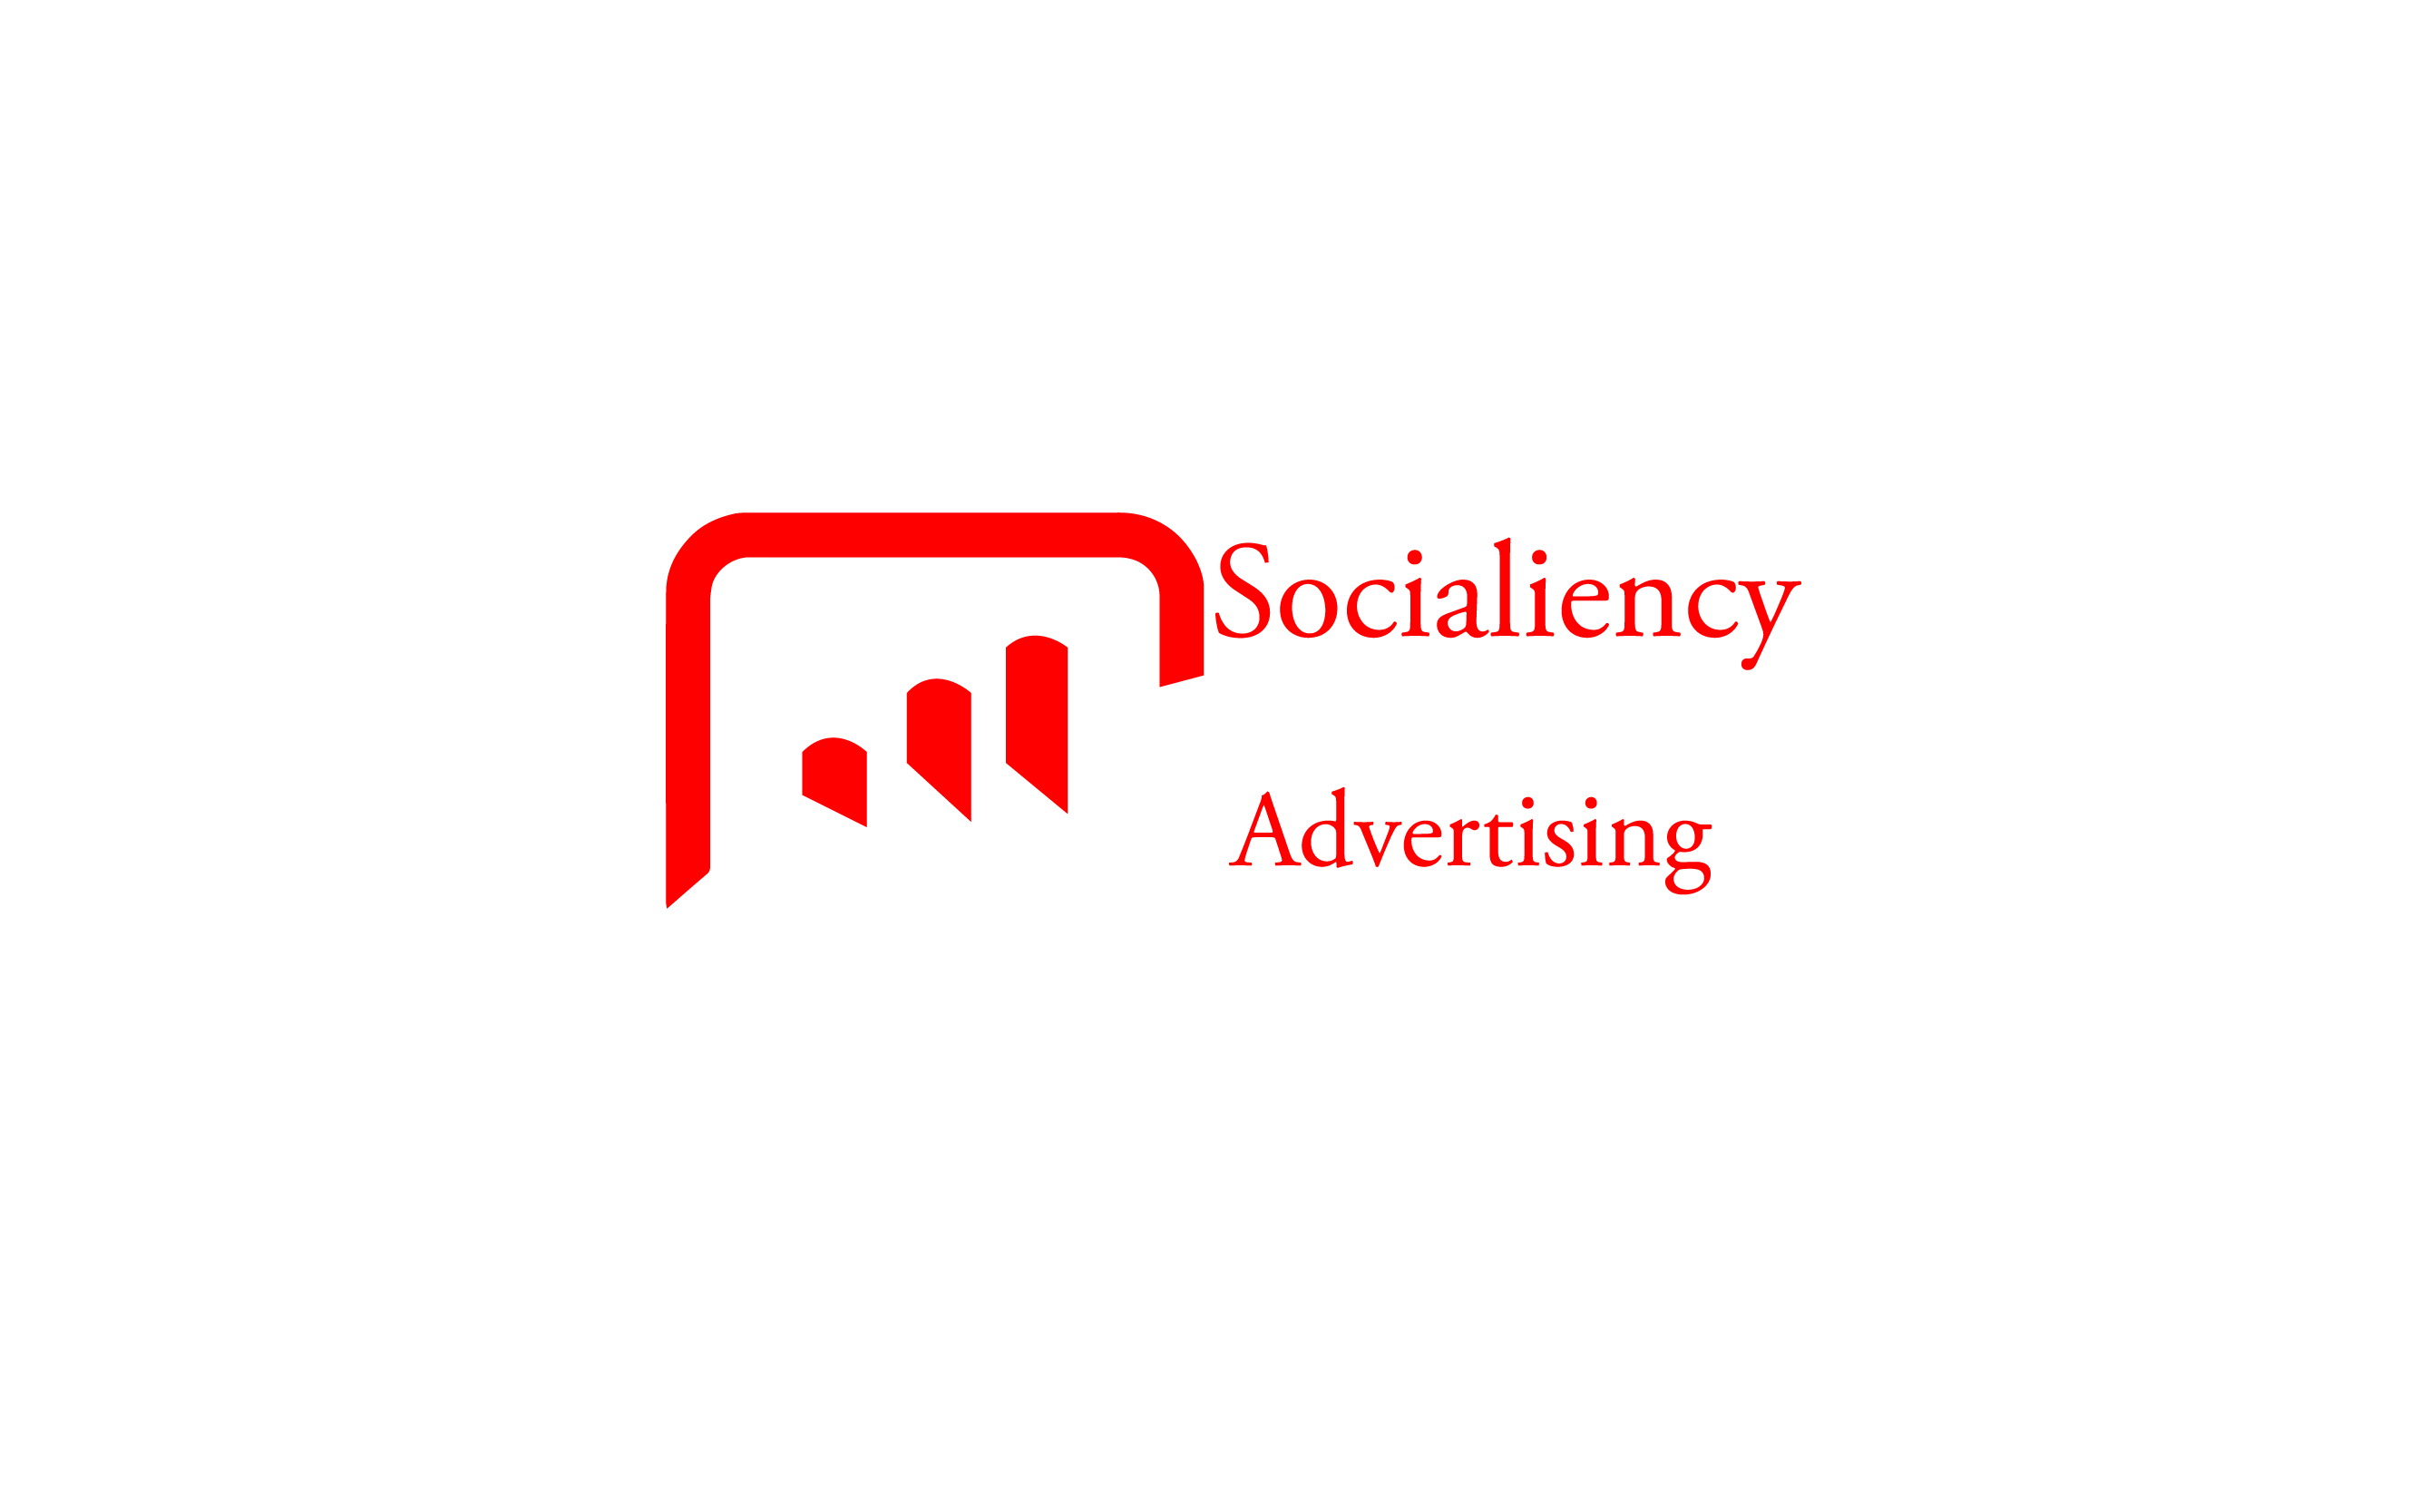 Socialiency Advertising profile on Qualified.One